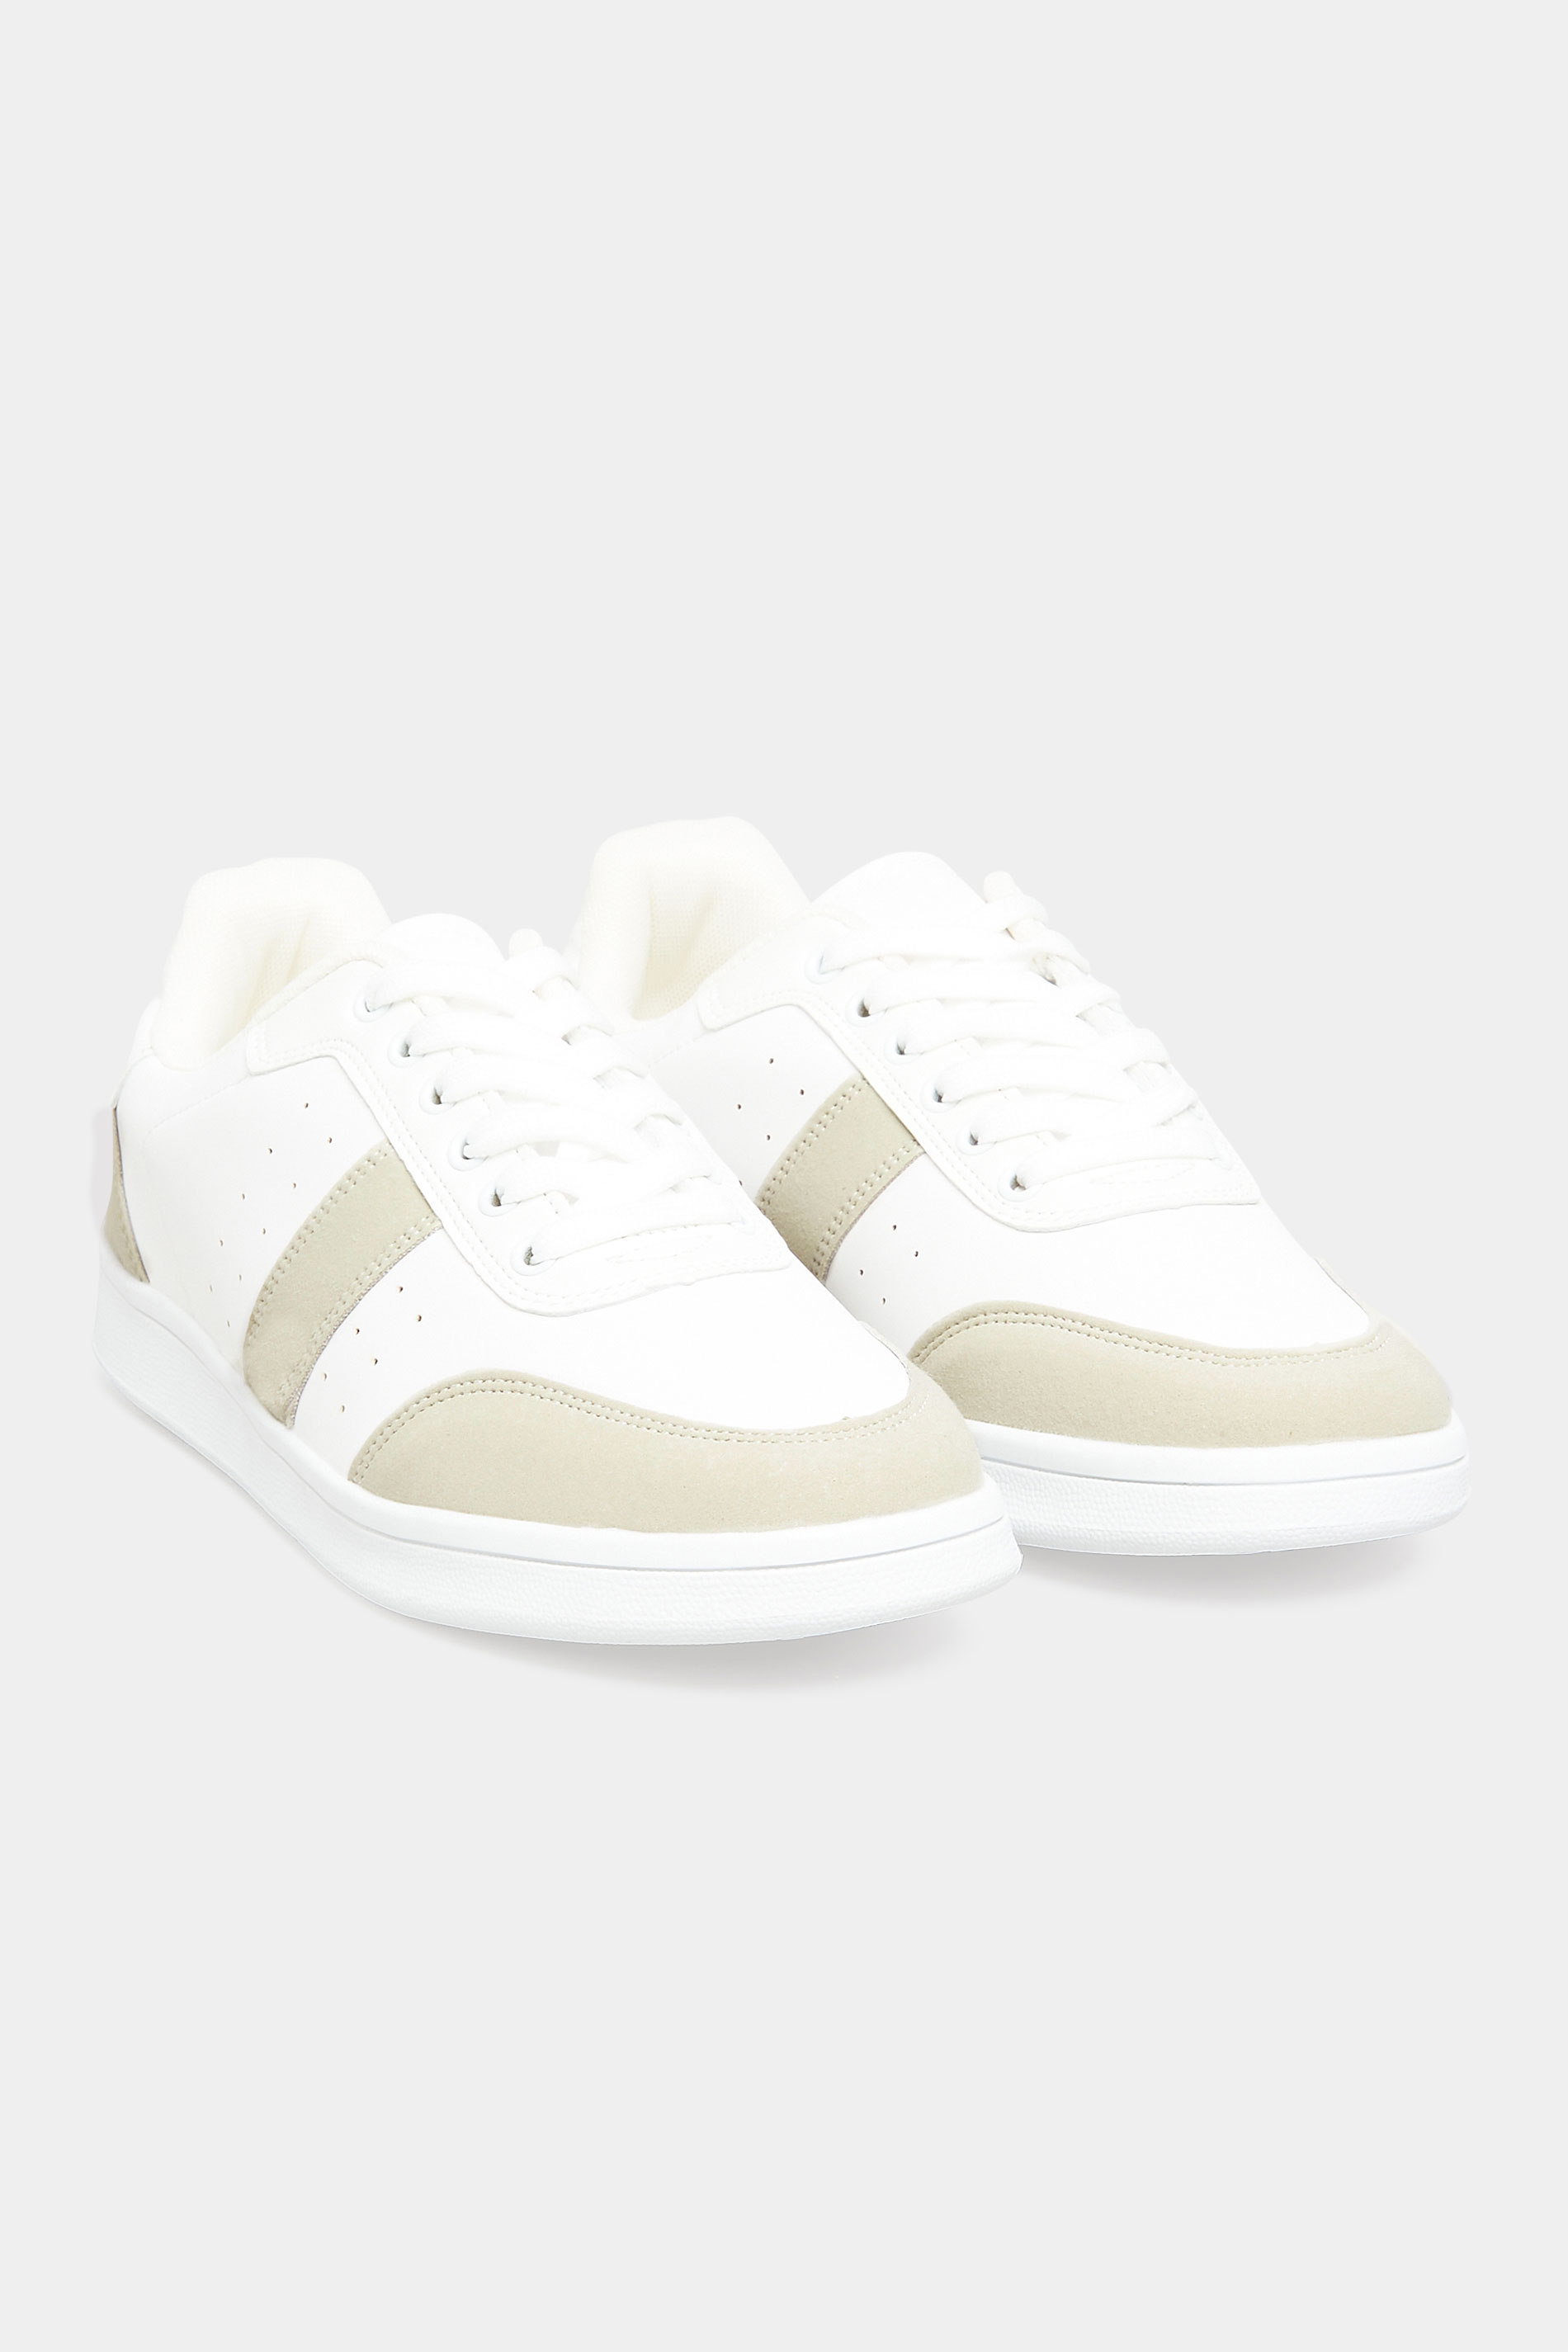 Chaussures Pieds Larges Tennis & Baskets Pieds Larges | Tennis Blanches & Beiges Pieds Larges E - WI91492